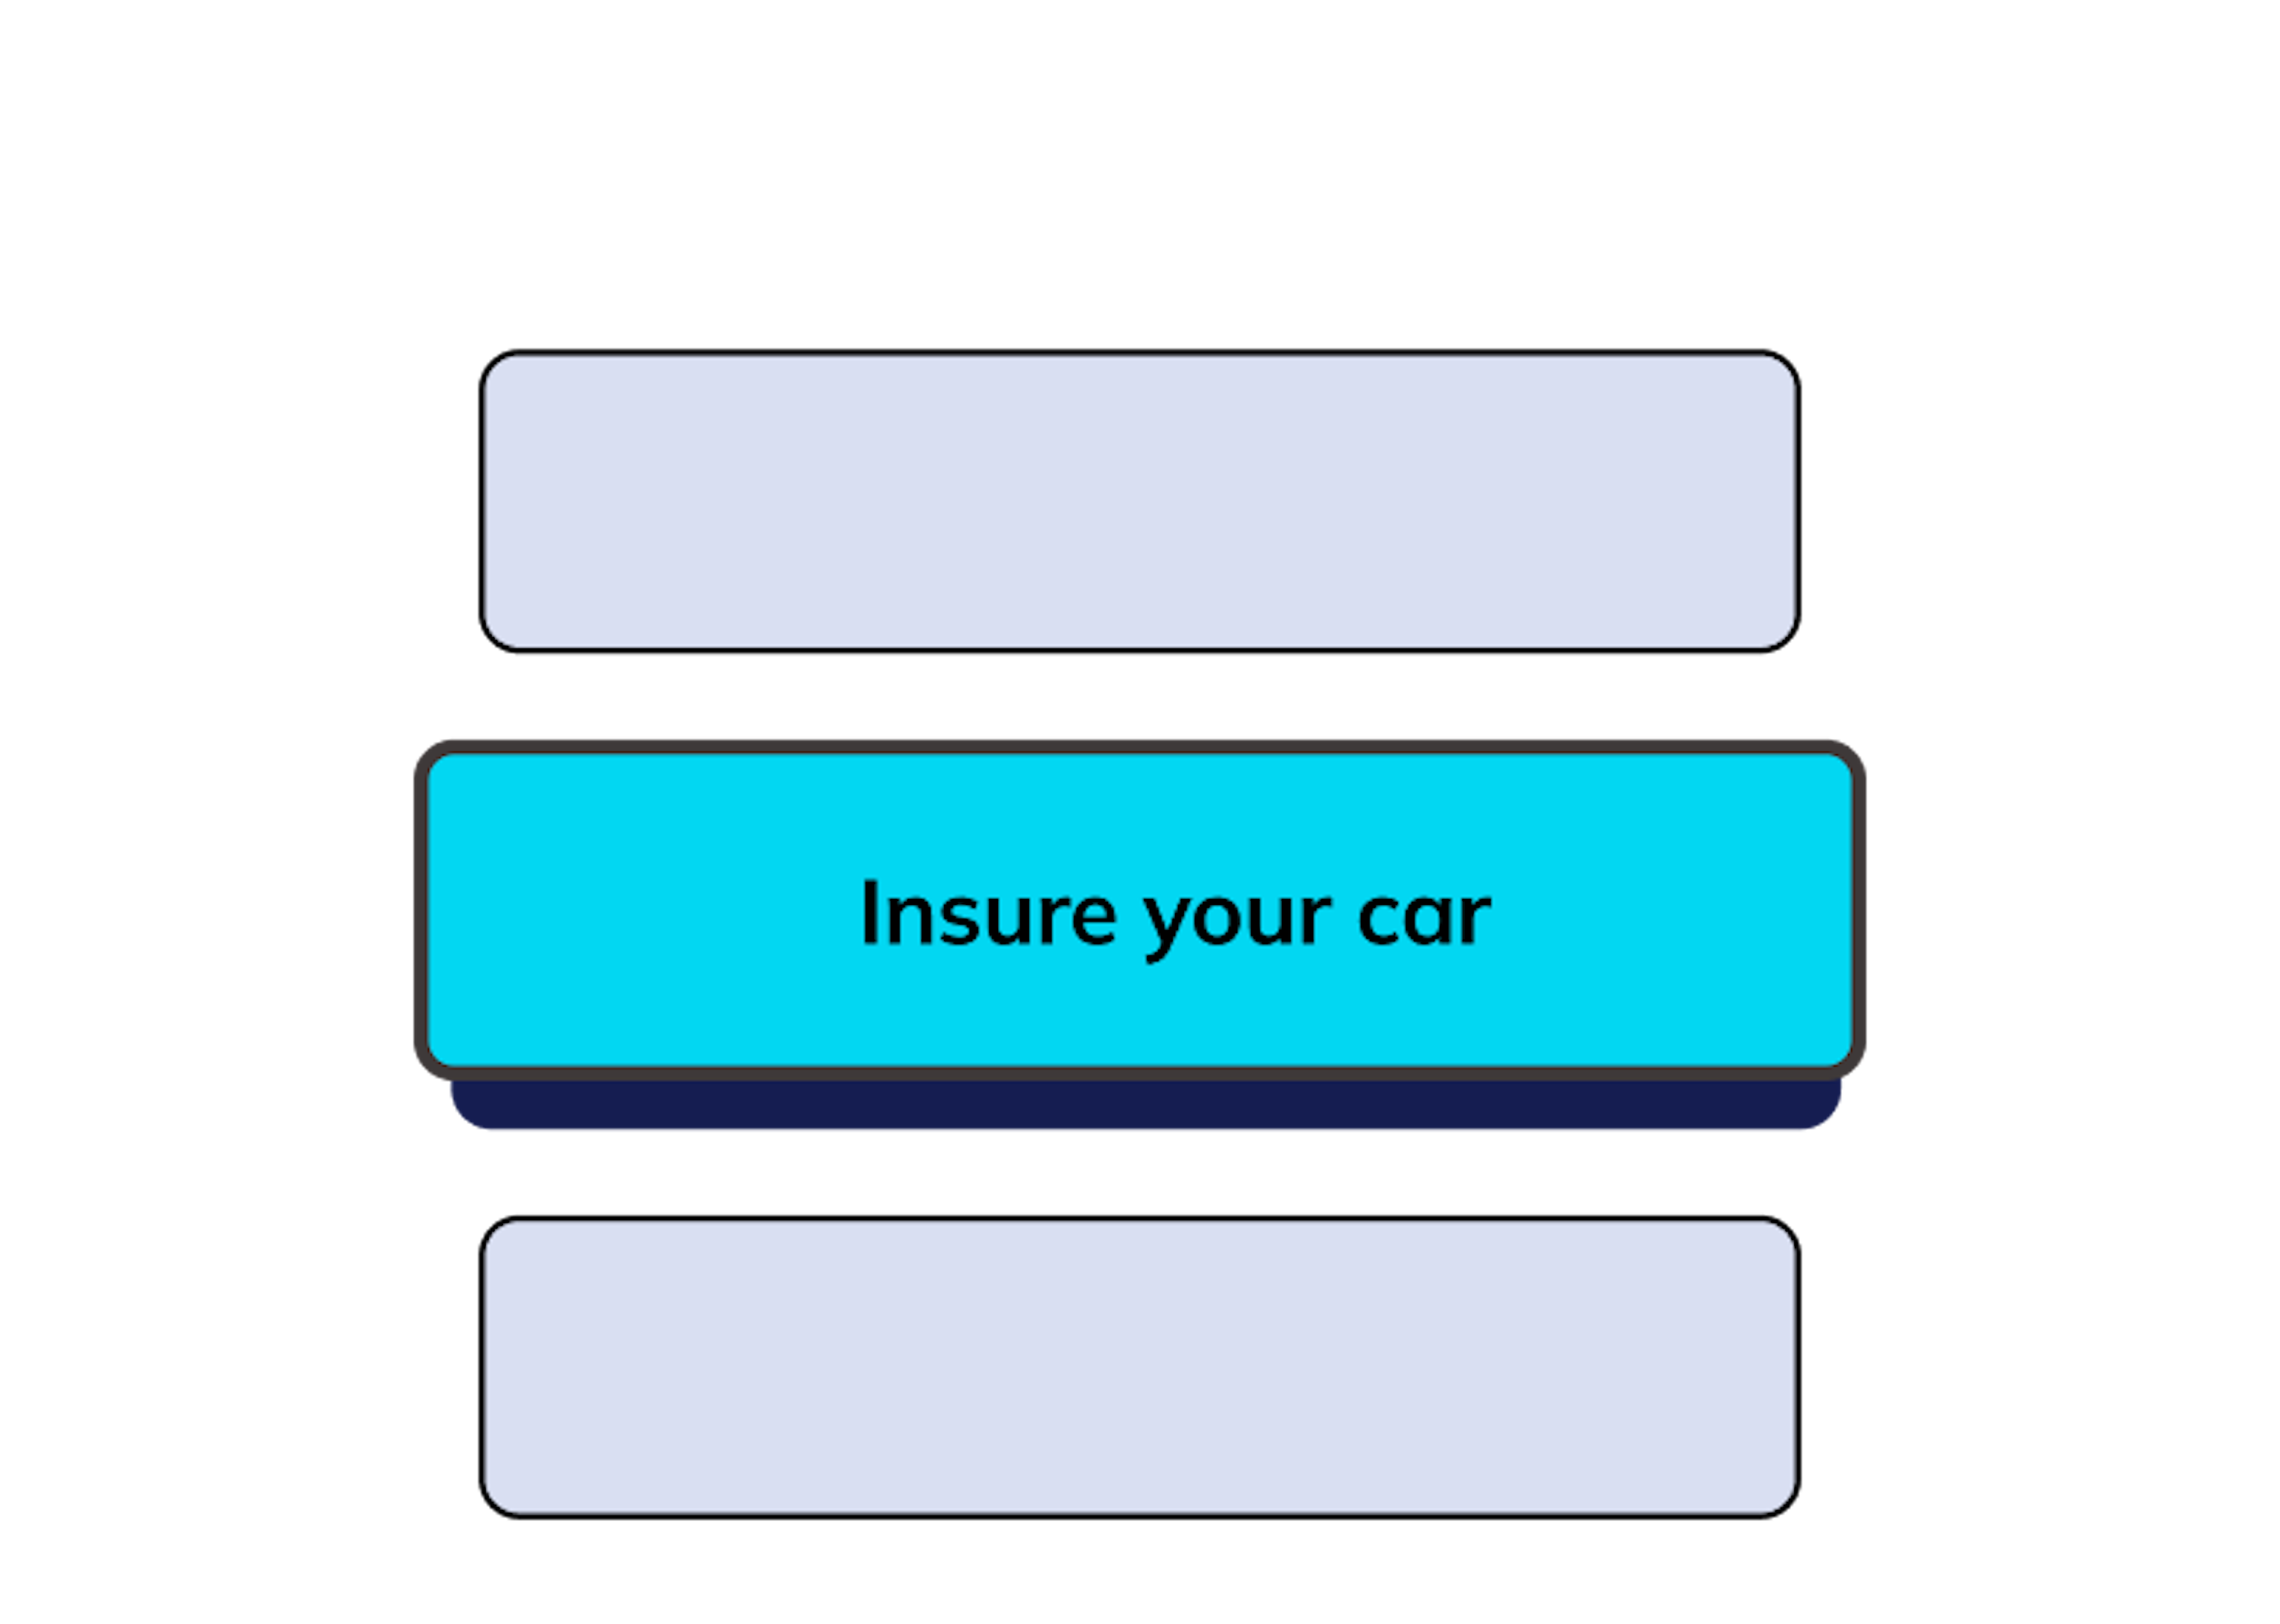 Pay Weekly, Monthly for car insurance